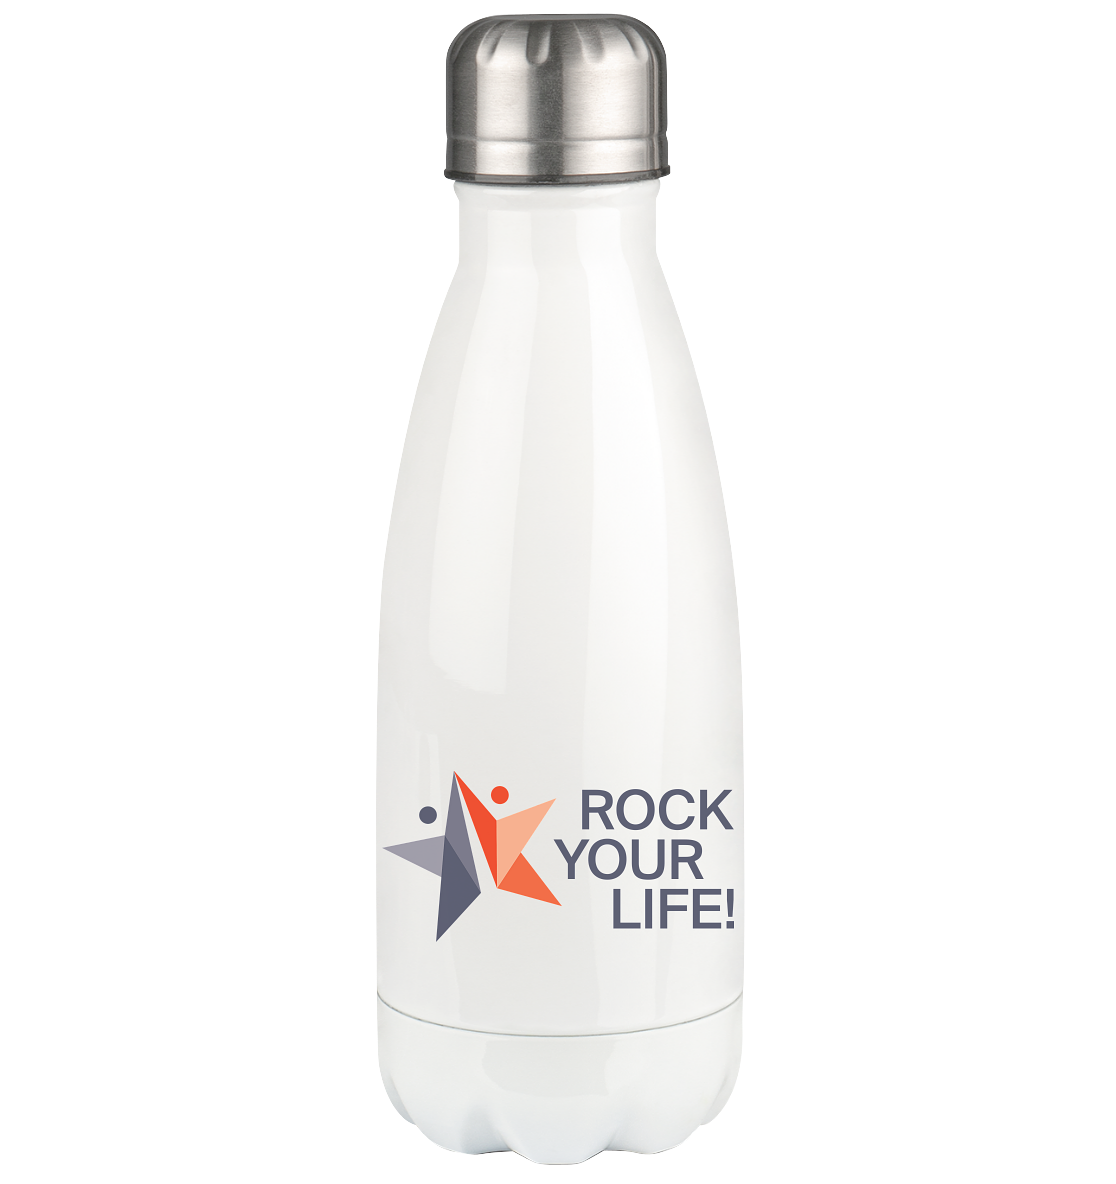 ROCK YOUR LIFE! - Thermoflasche 350ml